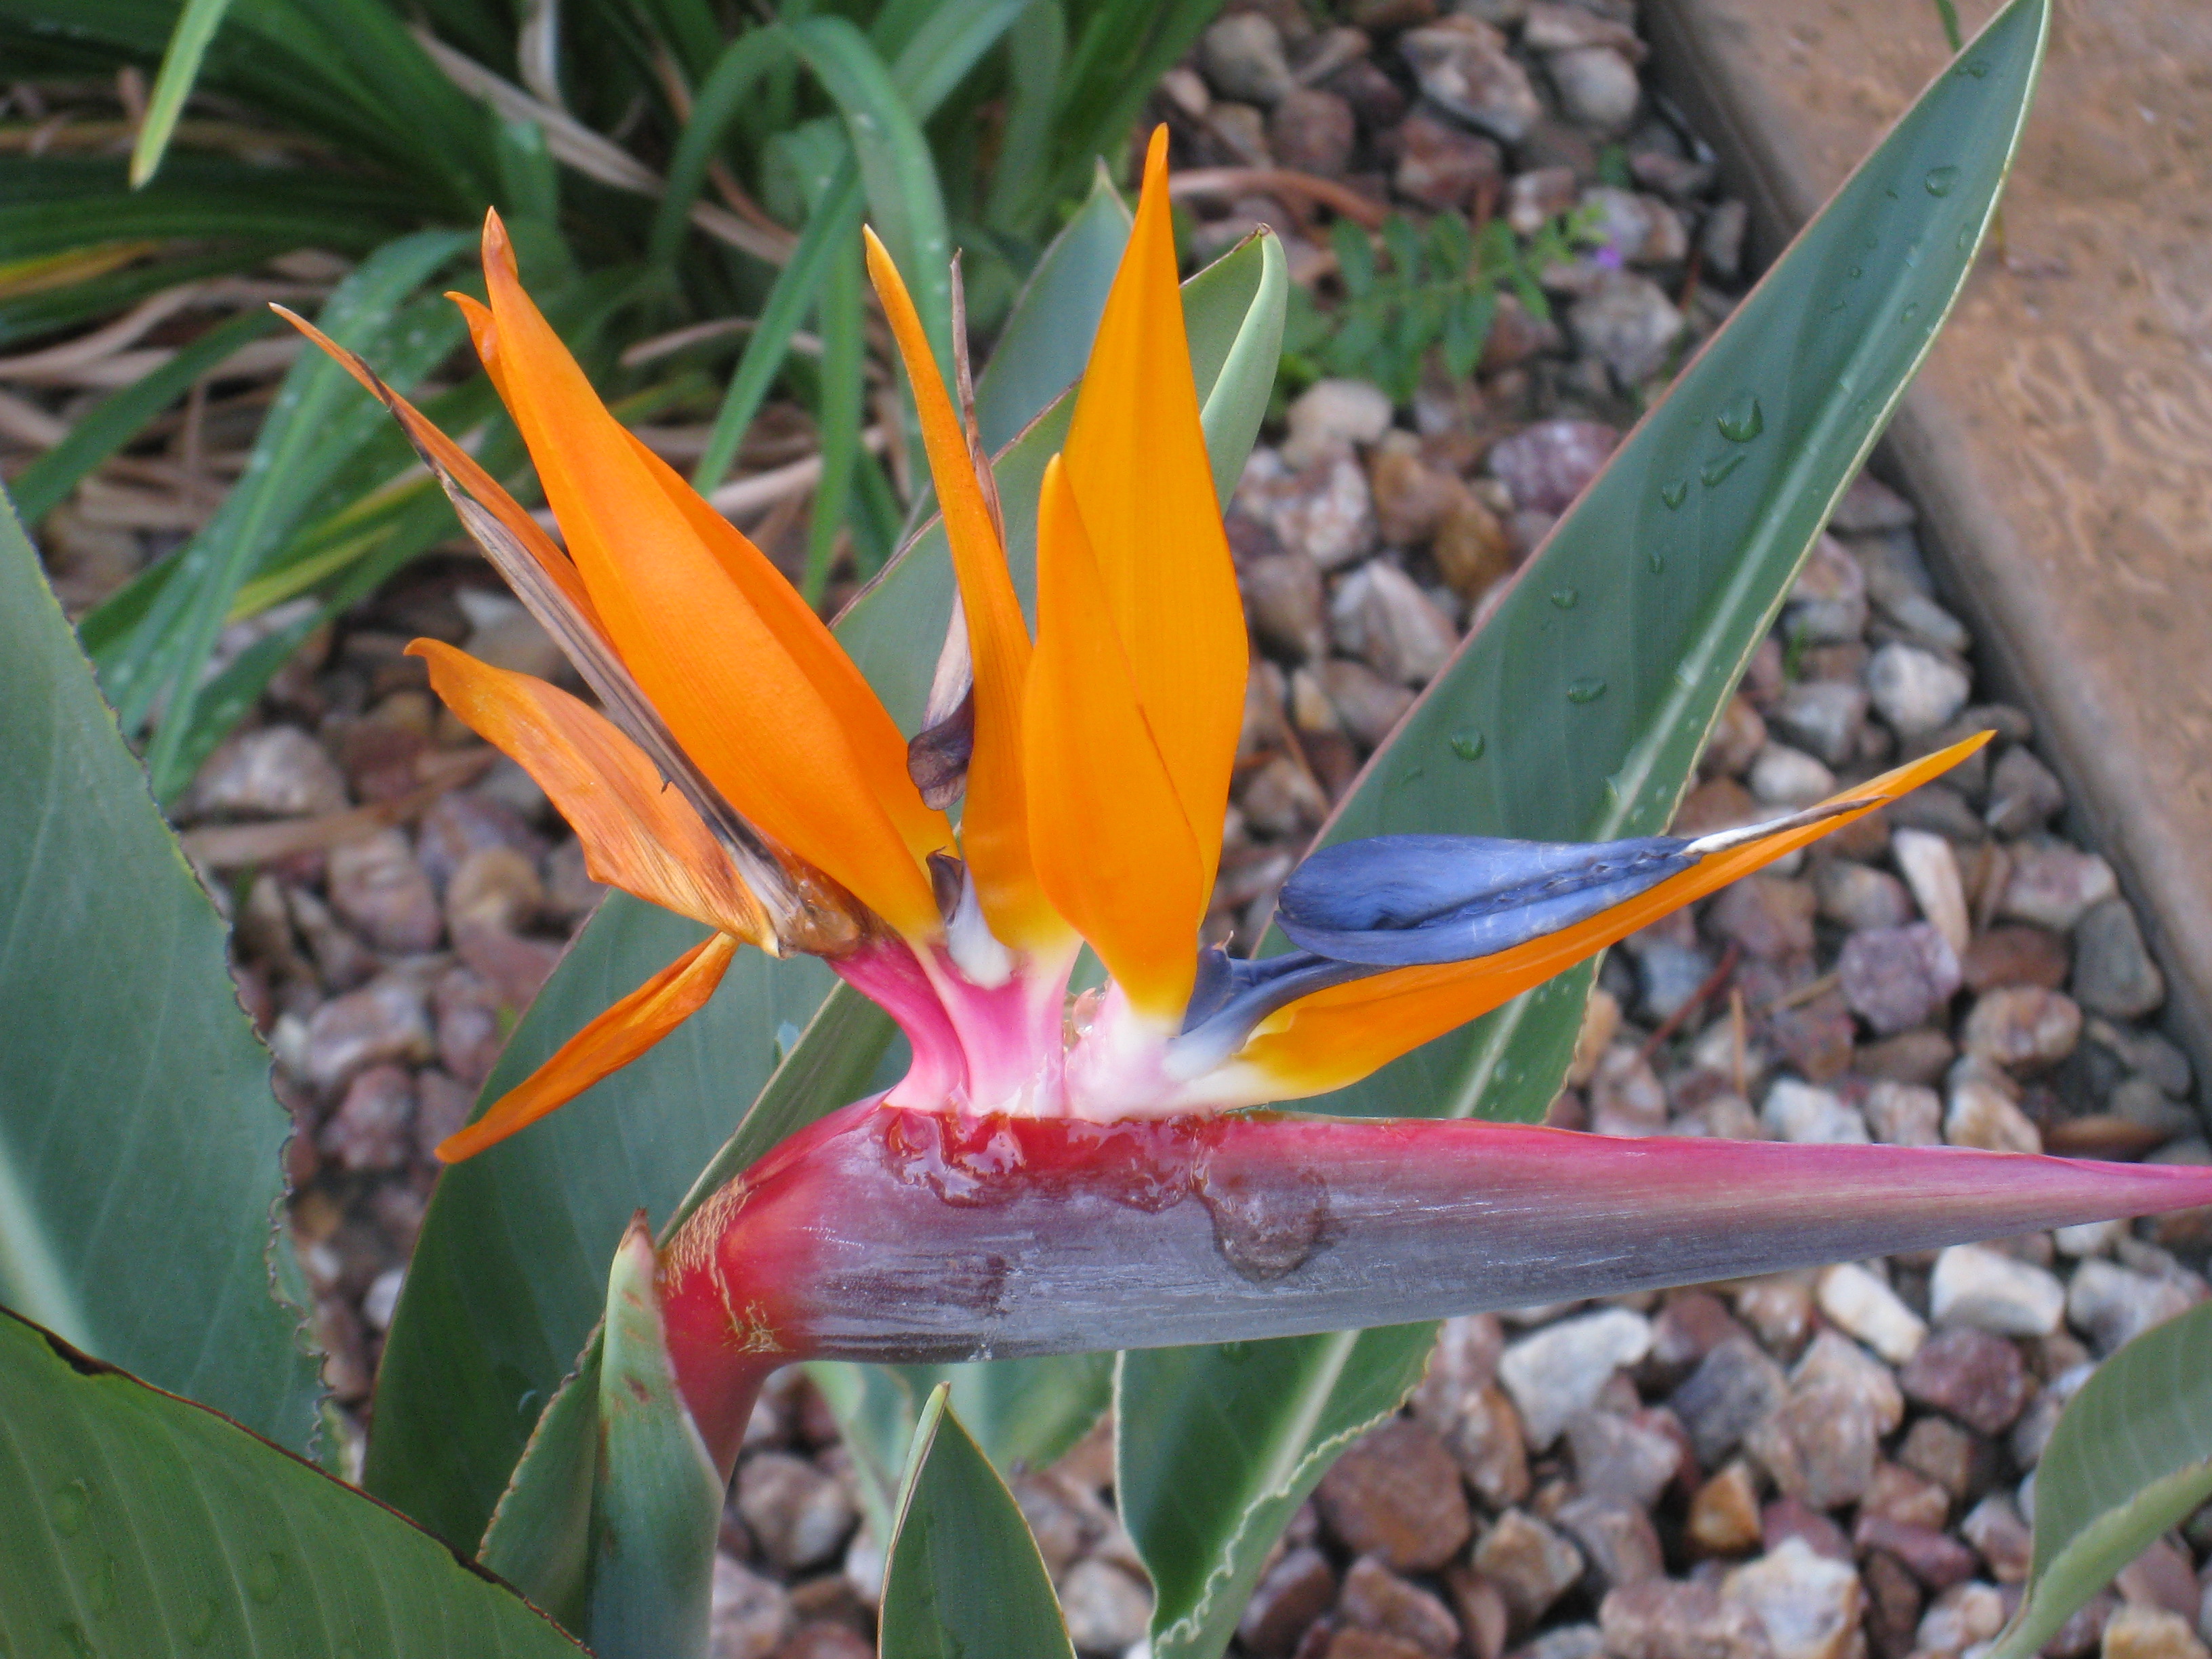  (Love the contrast of the snow photos and the bird of paradise on the same day)